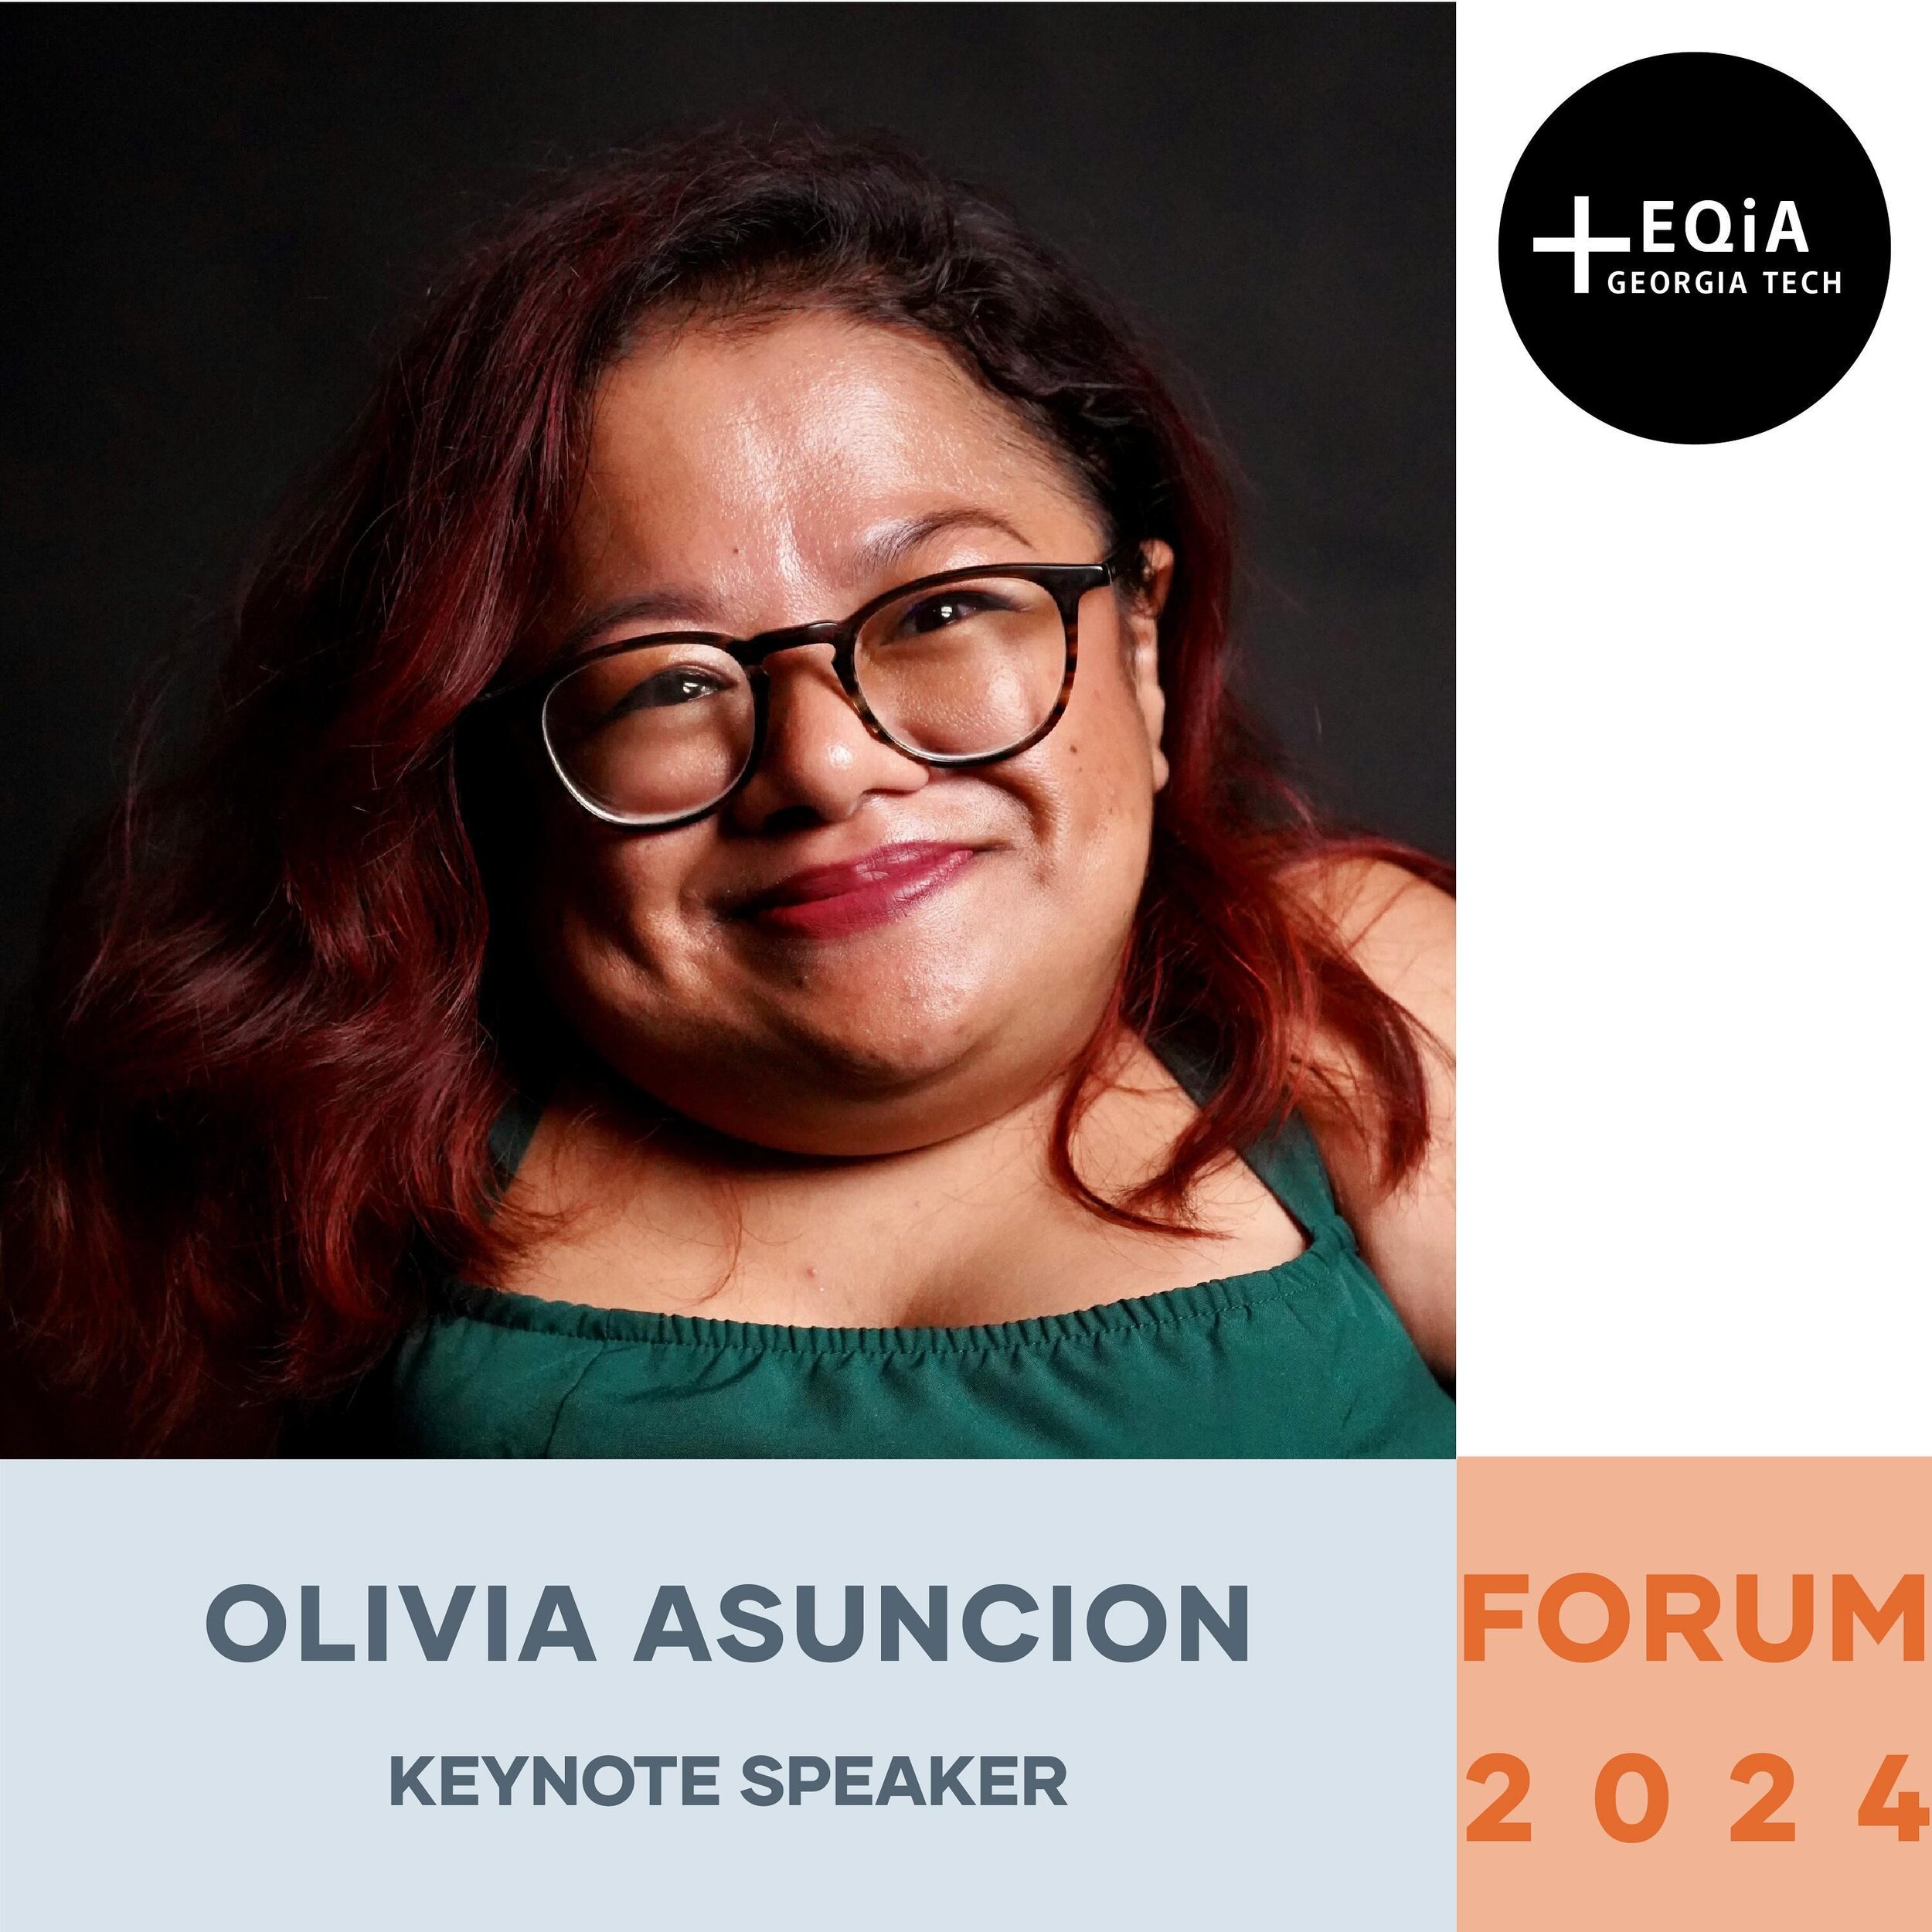 ⭐️ KEYNOTE SPEAKER ⭐️ 
We are so excited to share this year&rsquo;s Forum Keynote Speaker, Olivia Asuncion. 
Olivia Mae M. Asuncion, AIA is an architect working on K-12 educational facilities at Quattrocchi Kwok Architects in Oakland, California. She